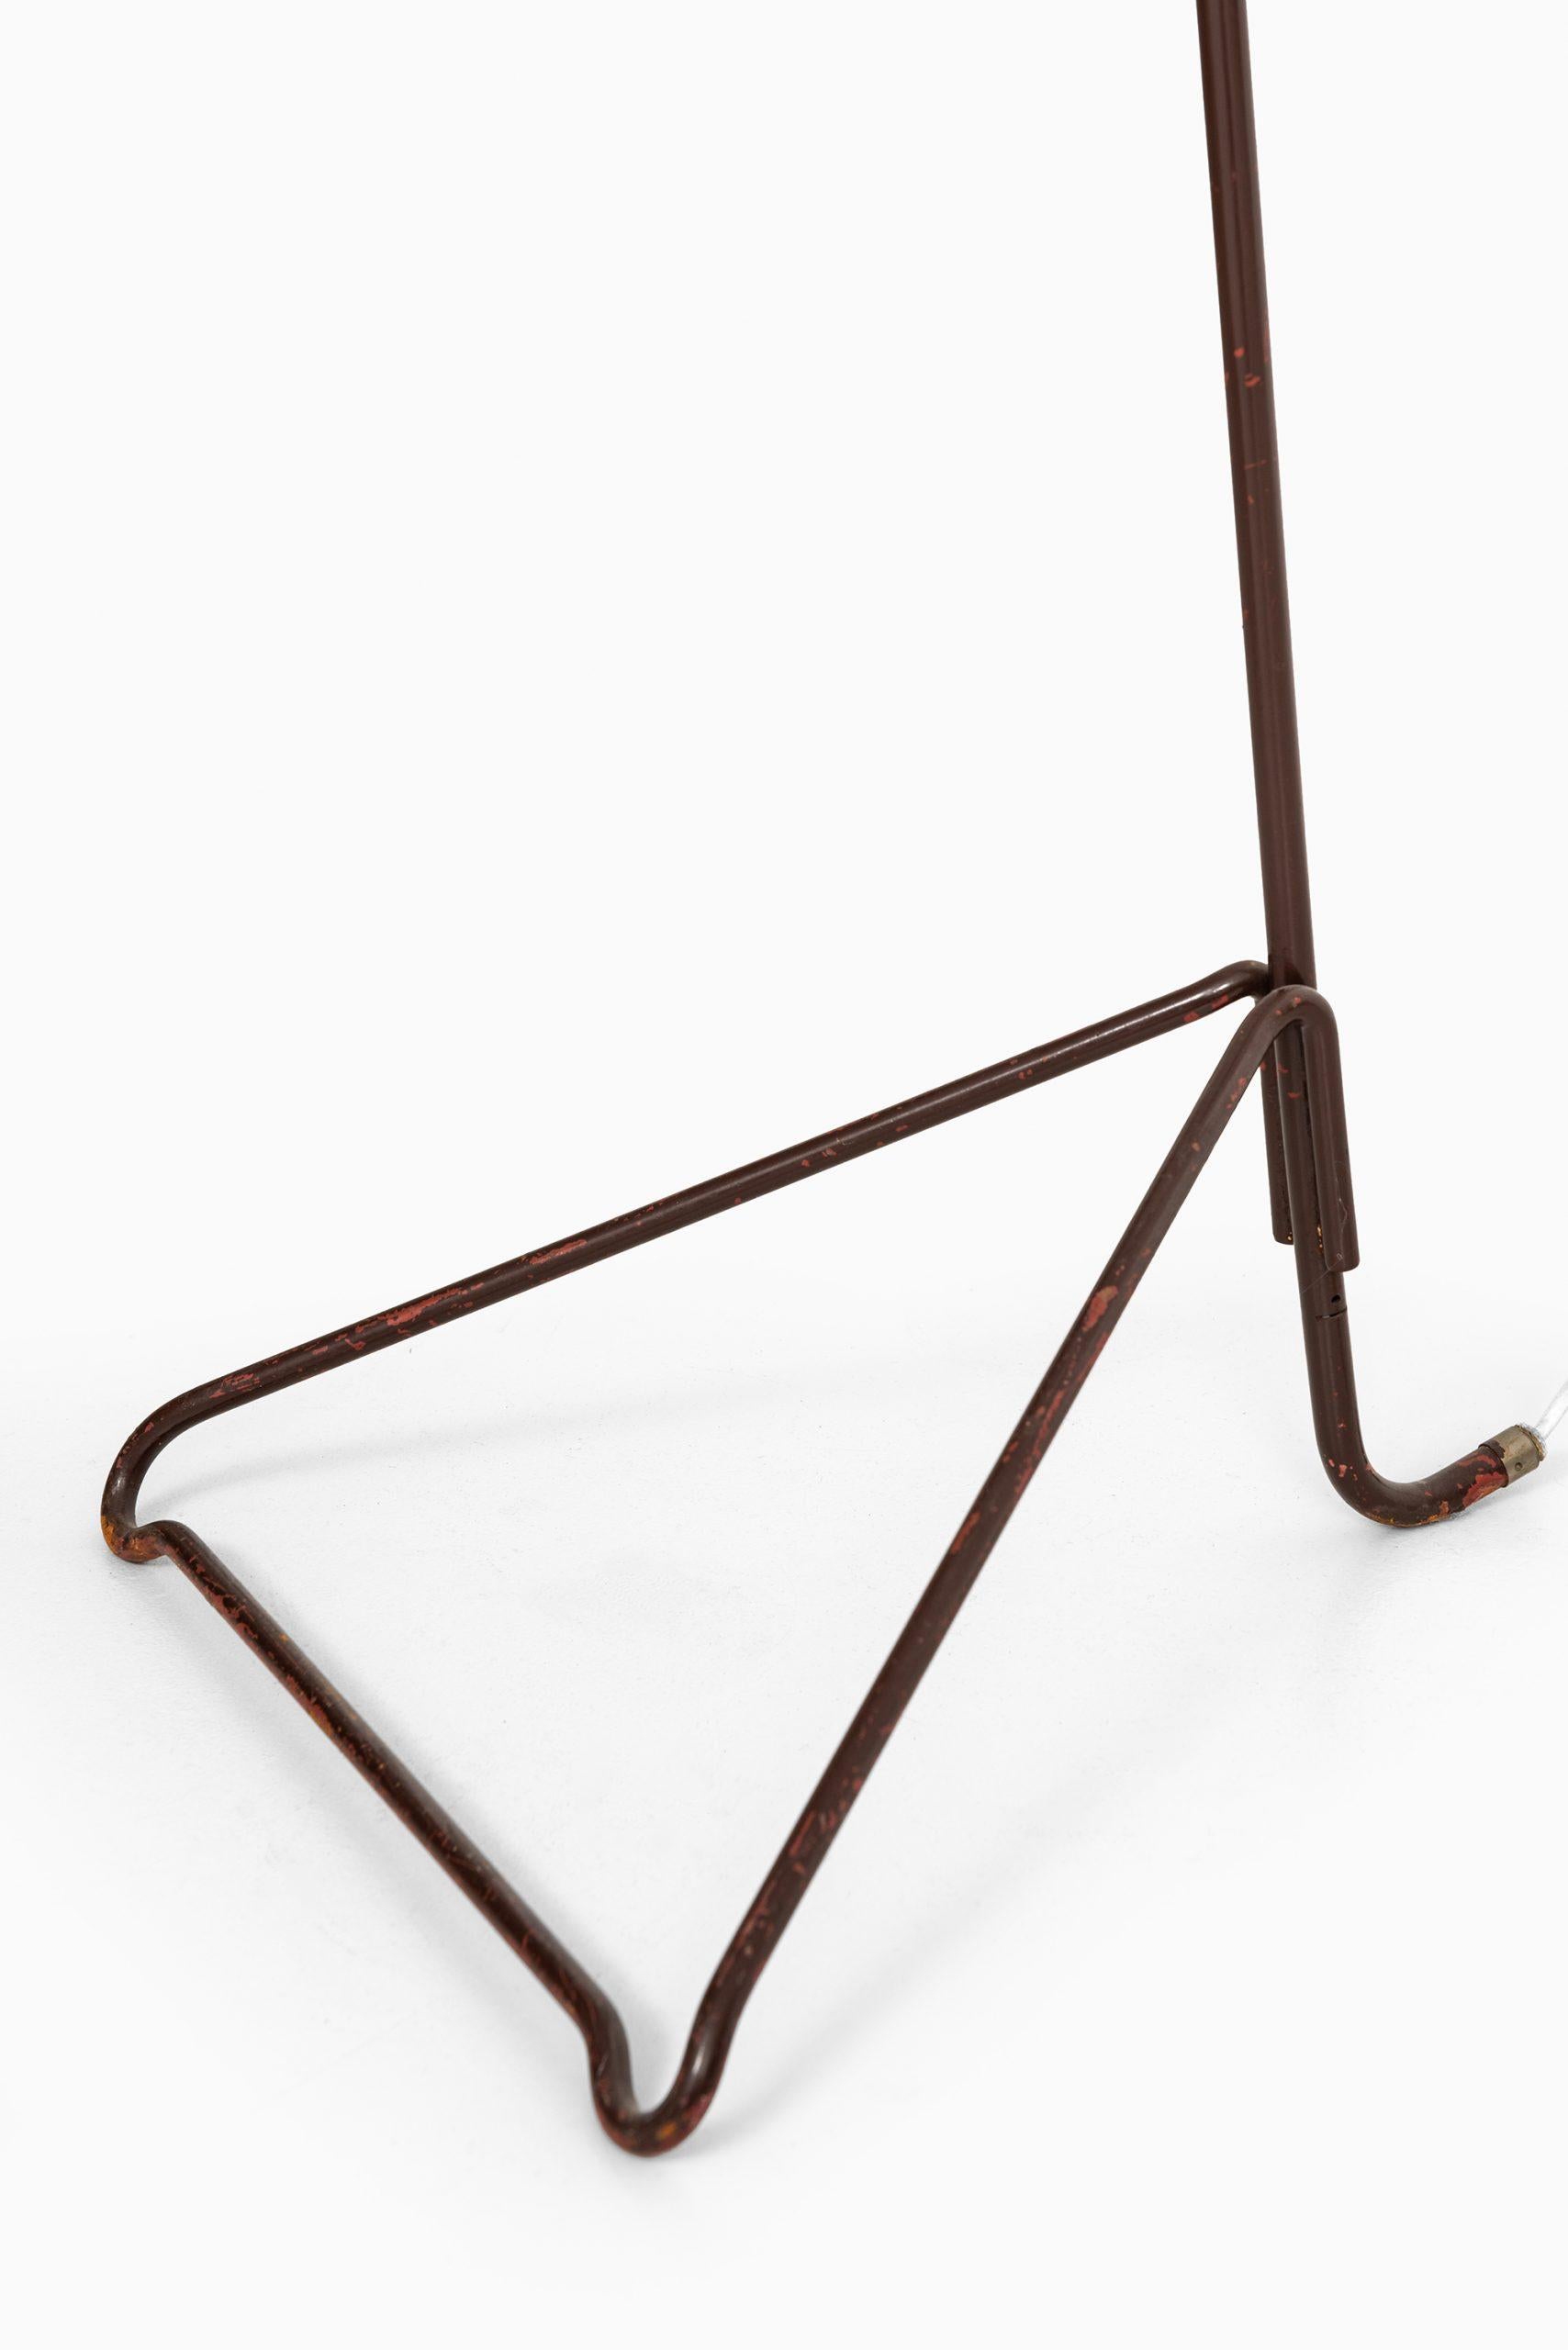 Swedish Floor Lamp Produced by ASEA in Sweden